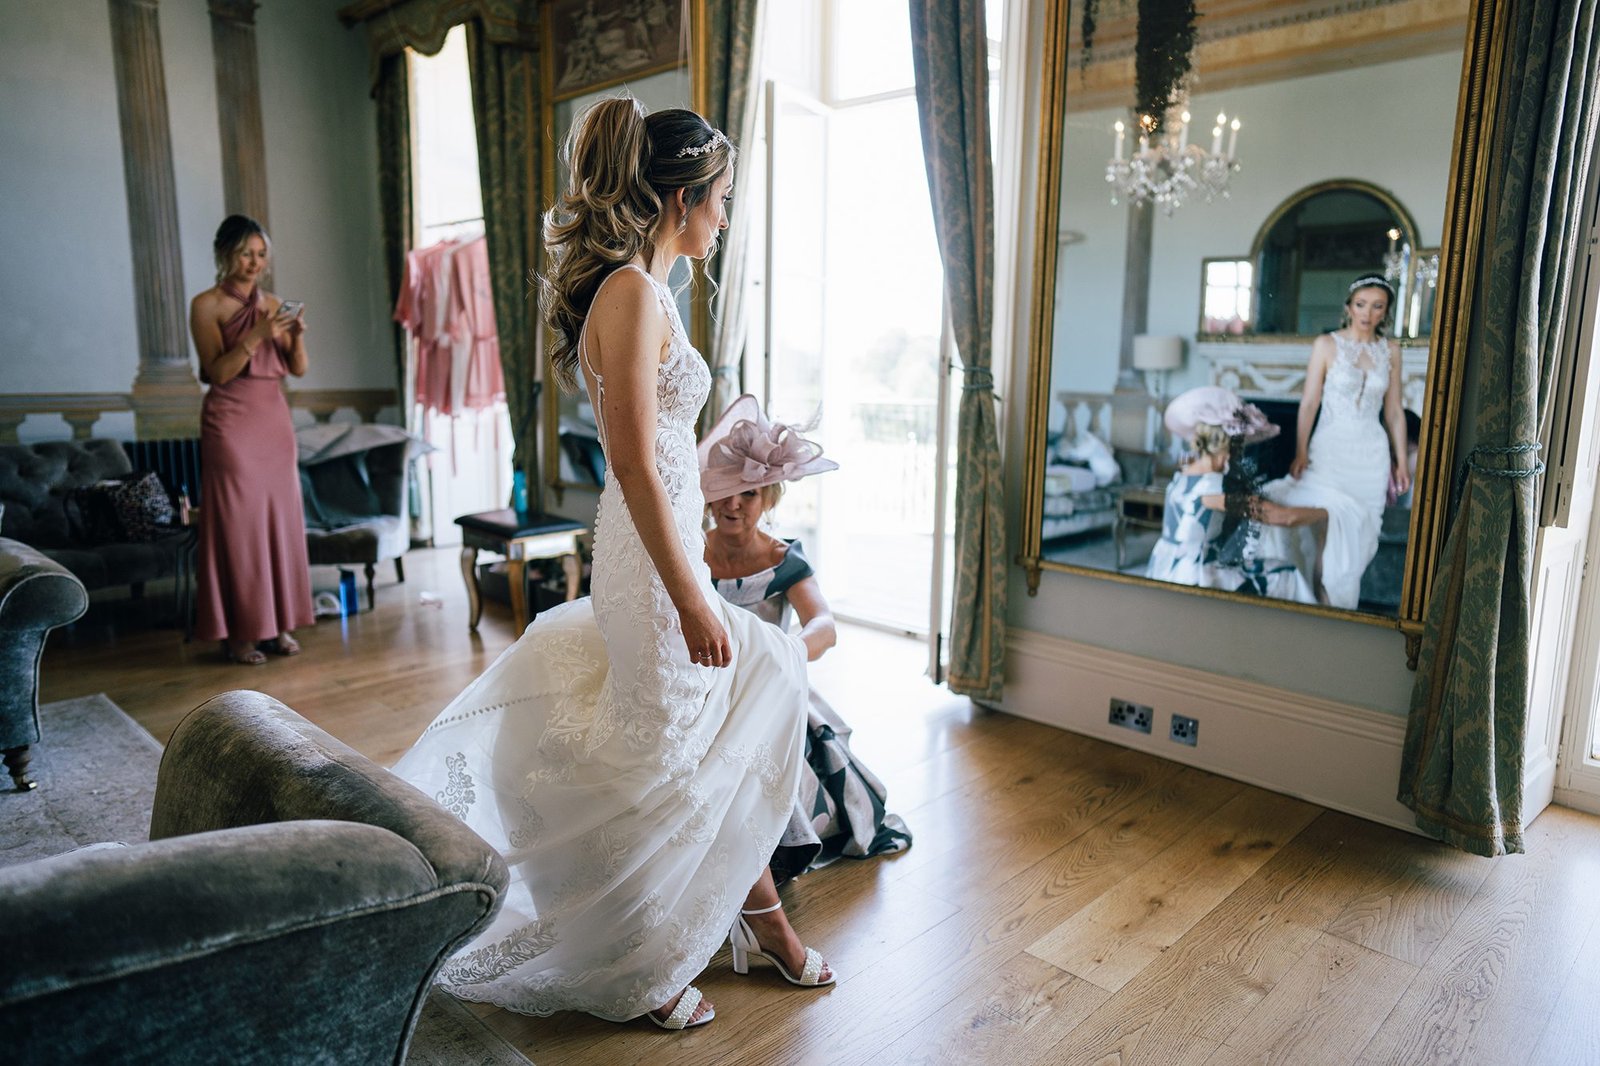 Rockbeare Manor wedding by Younger photography